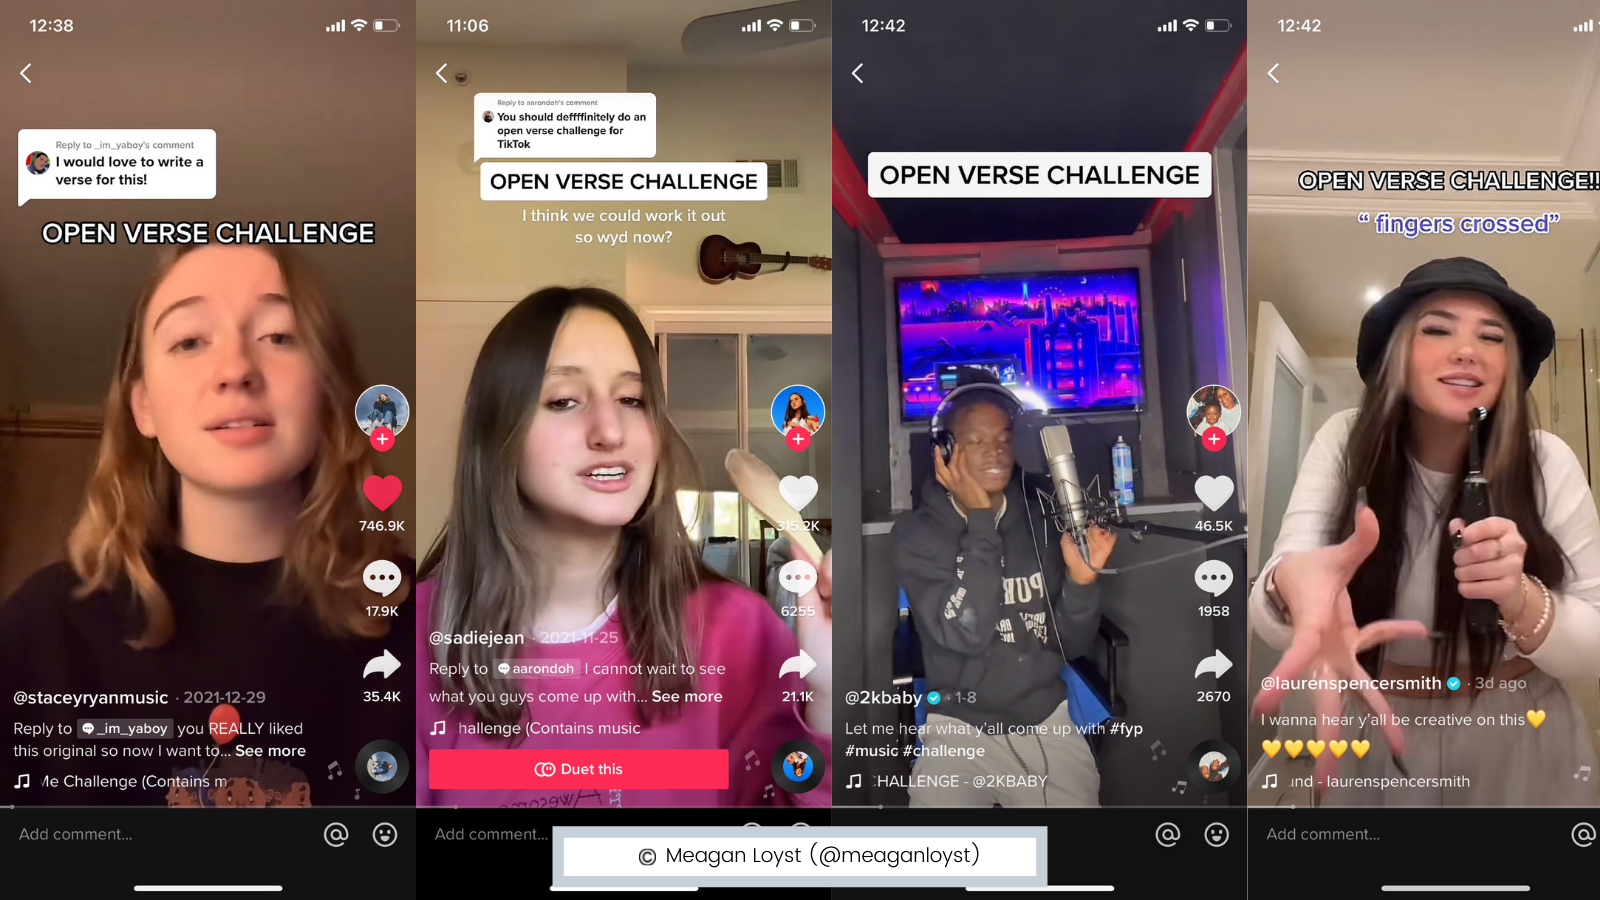 Examples of the popular "Open Verse Challenge" on TikTok, with users utilizing the stitching/duet feature